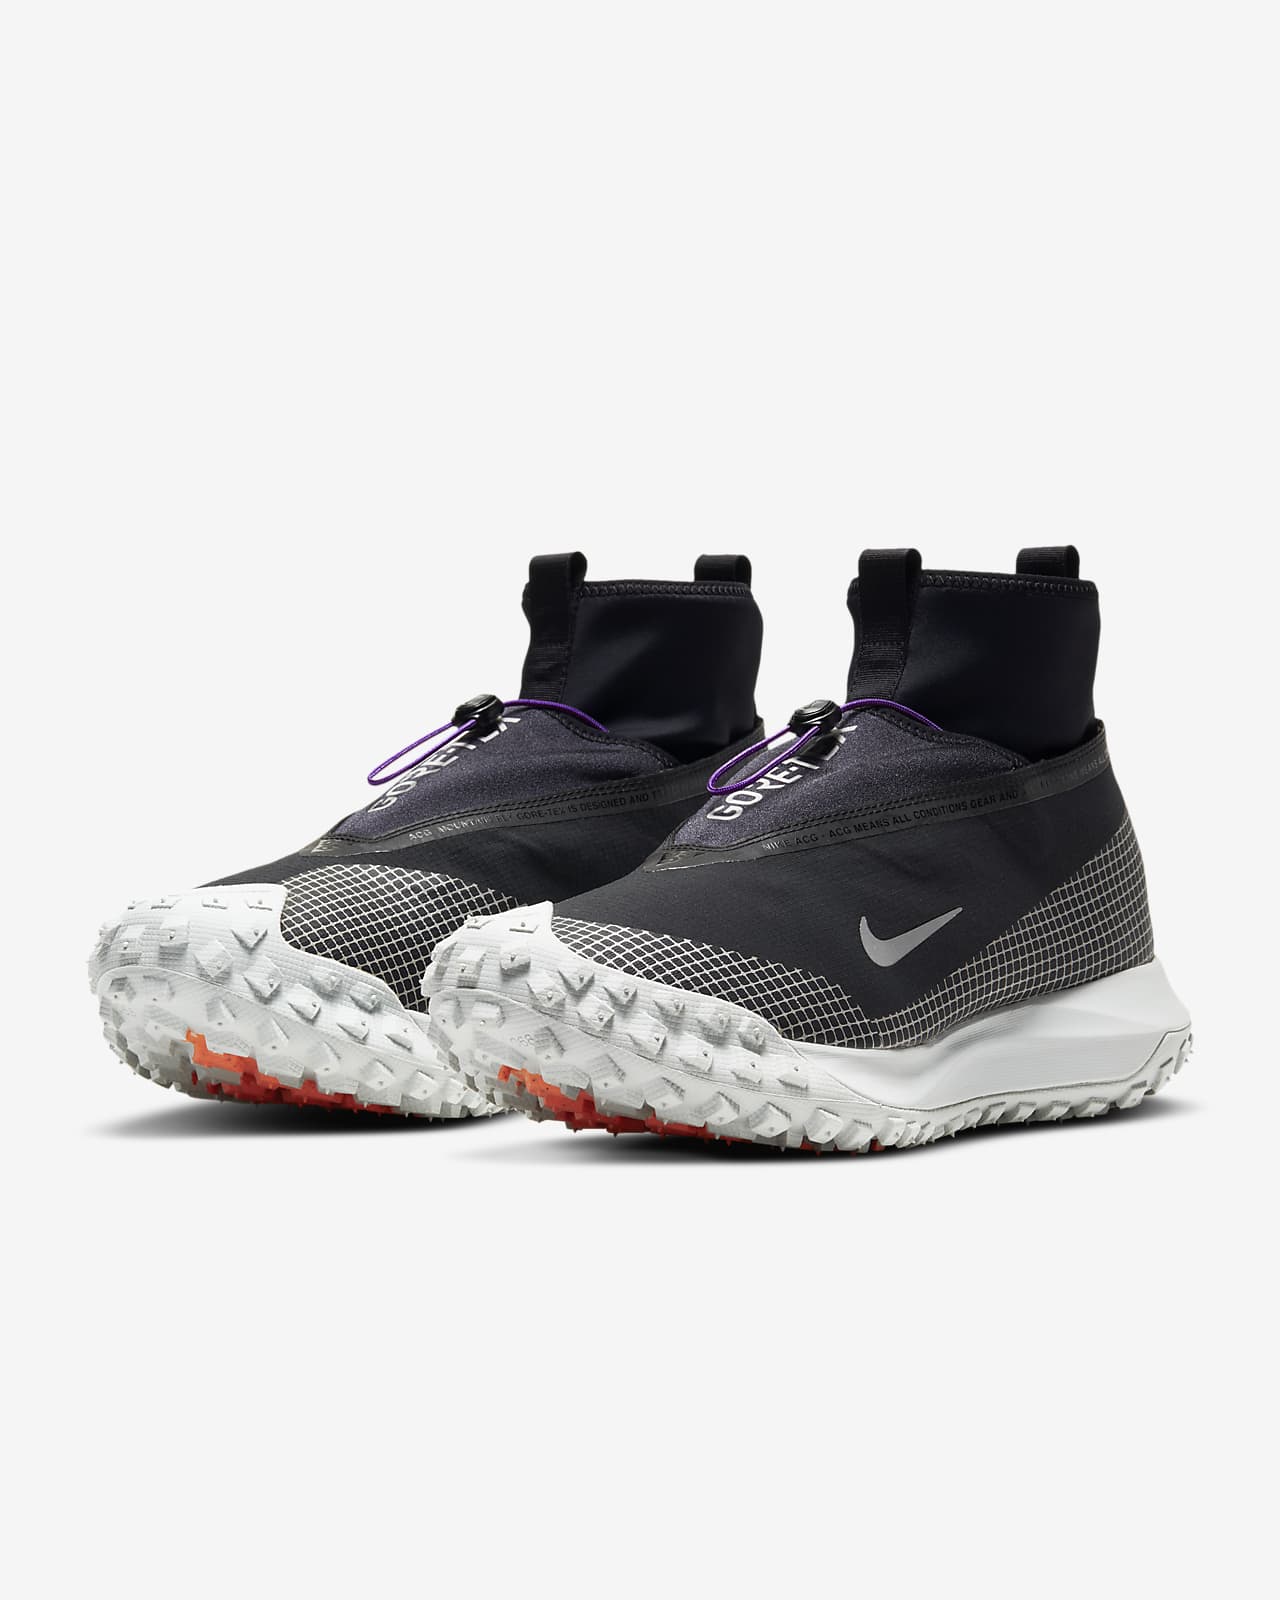 nike acg what does it stand for